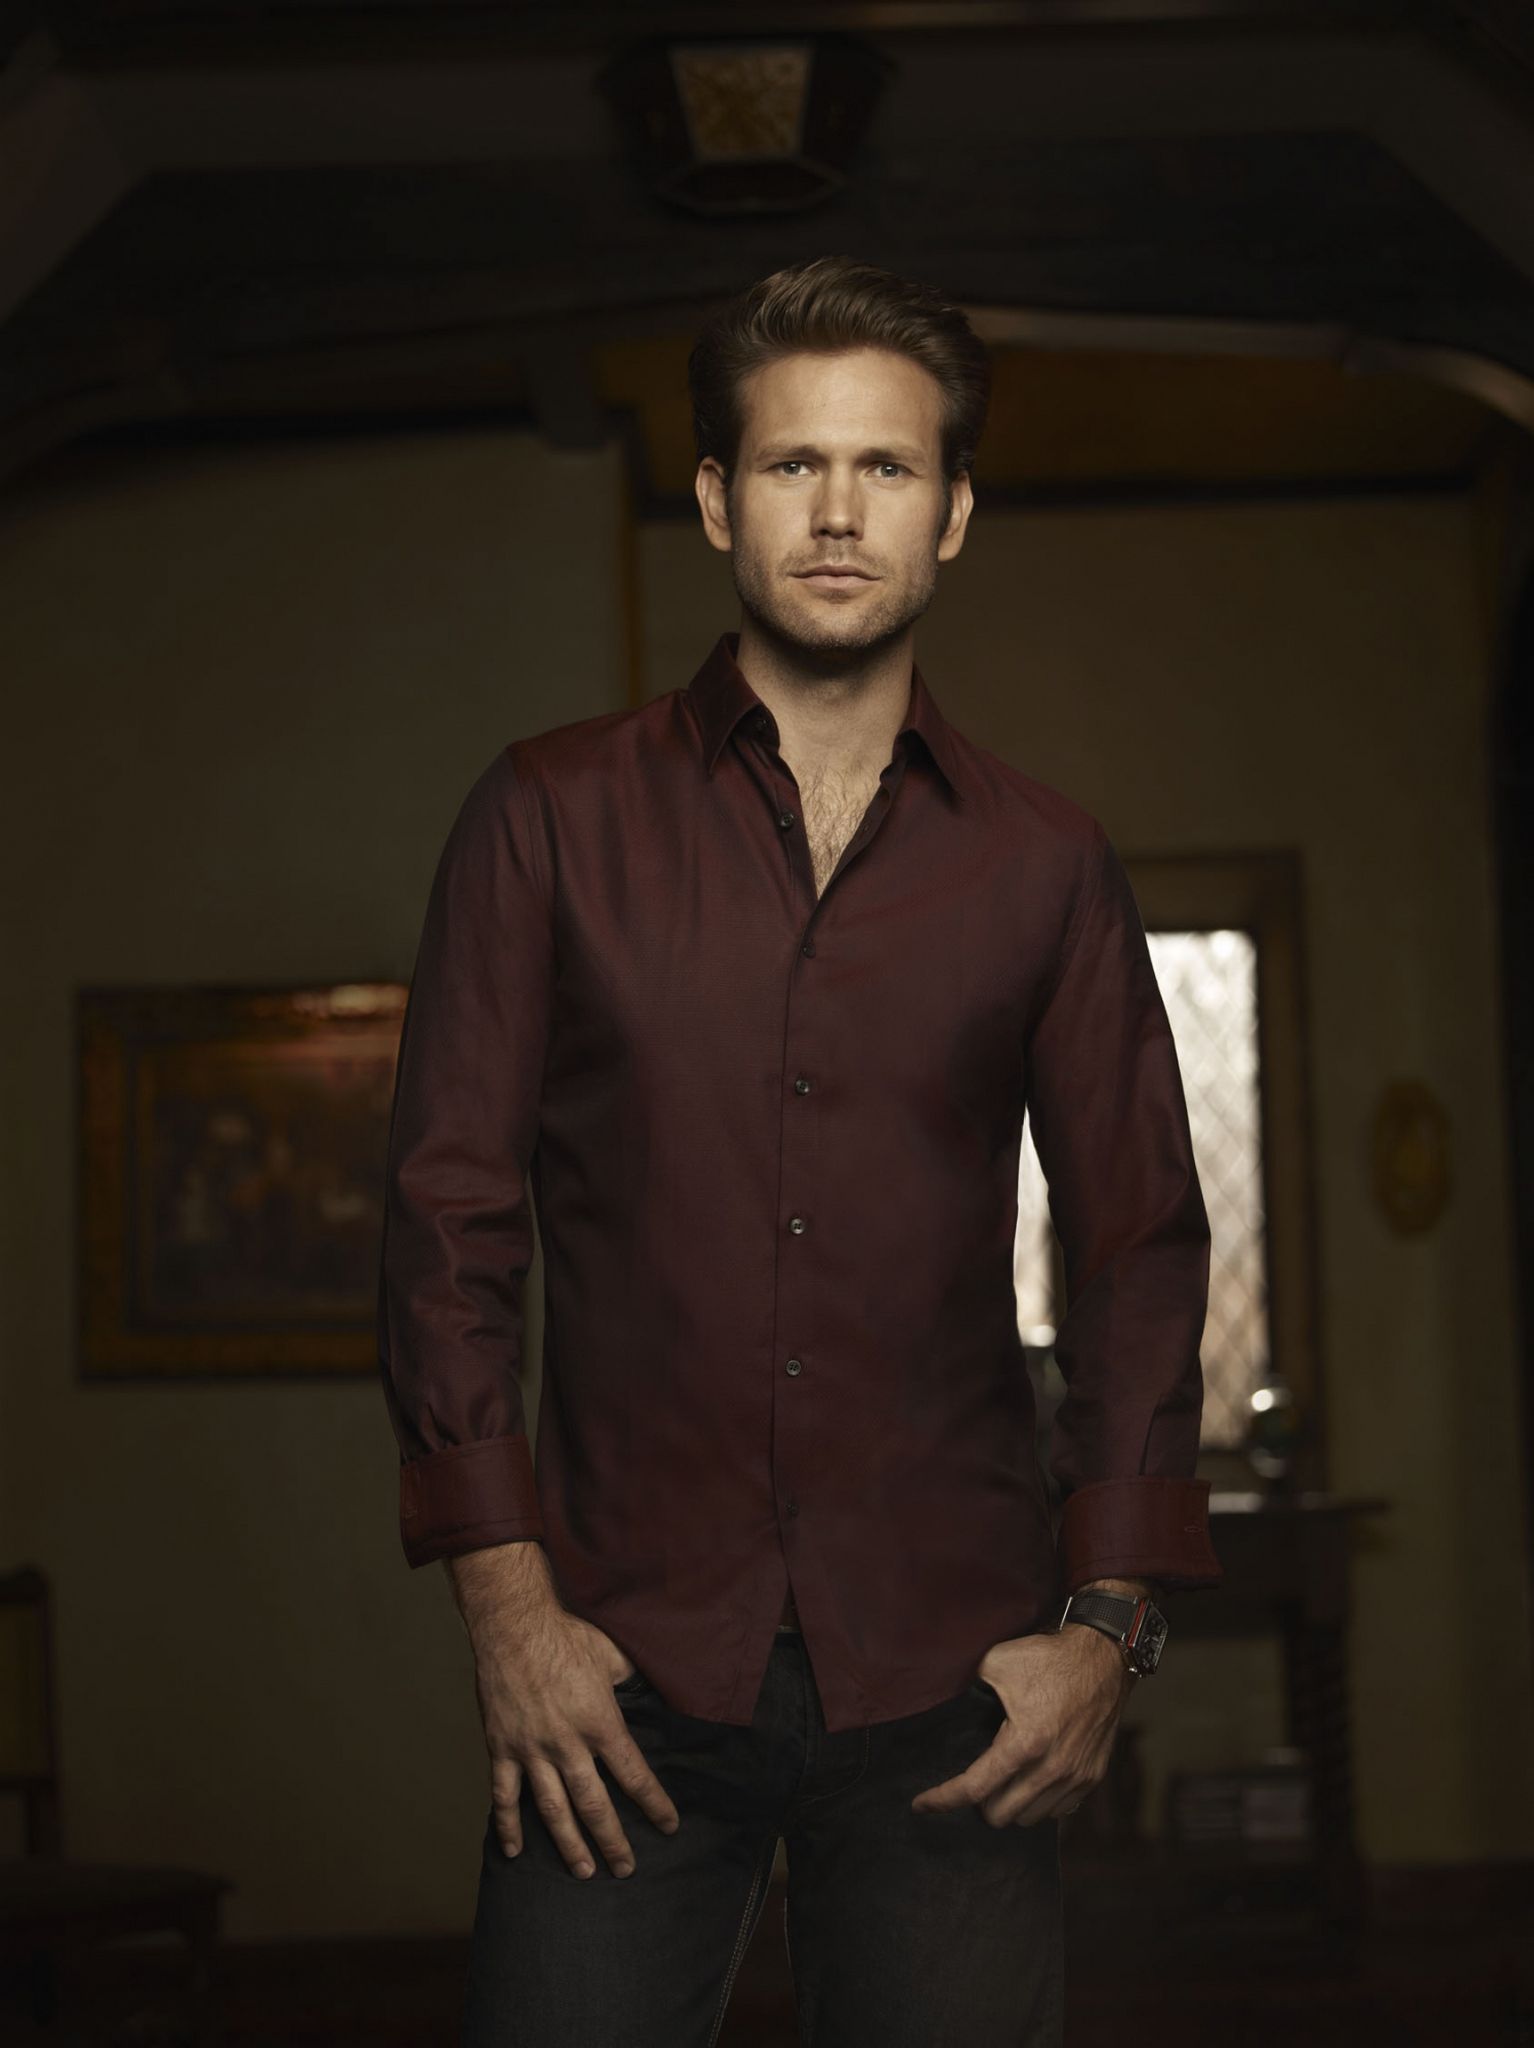 The Vampire Diaries Pictured: Matt Davis as Alaric Photo Credit: Art Streiber / The CW © 2010 The CW Network, LLC. All Rights Reserved.